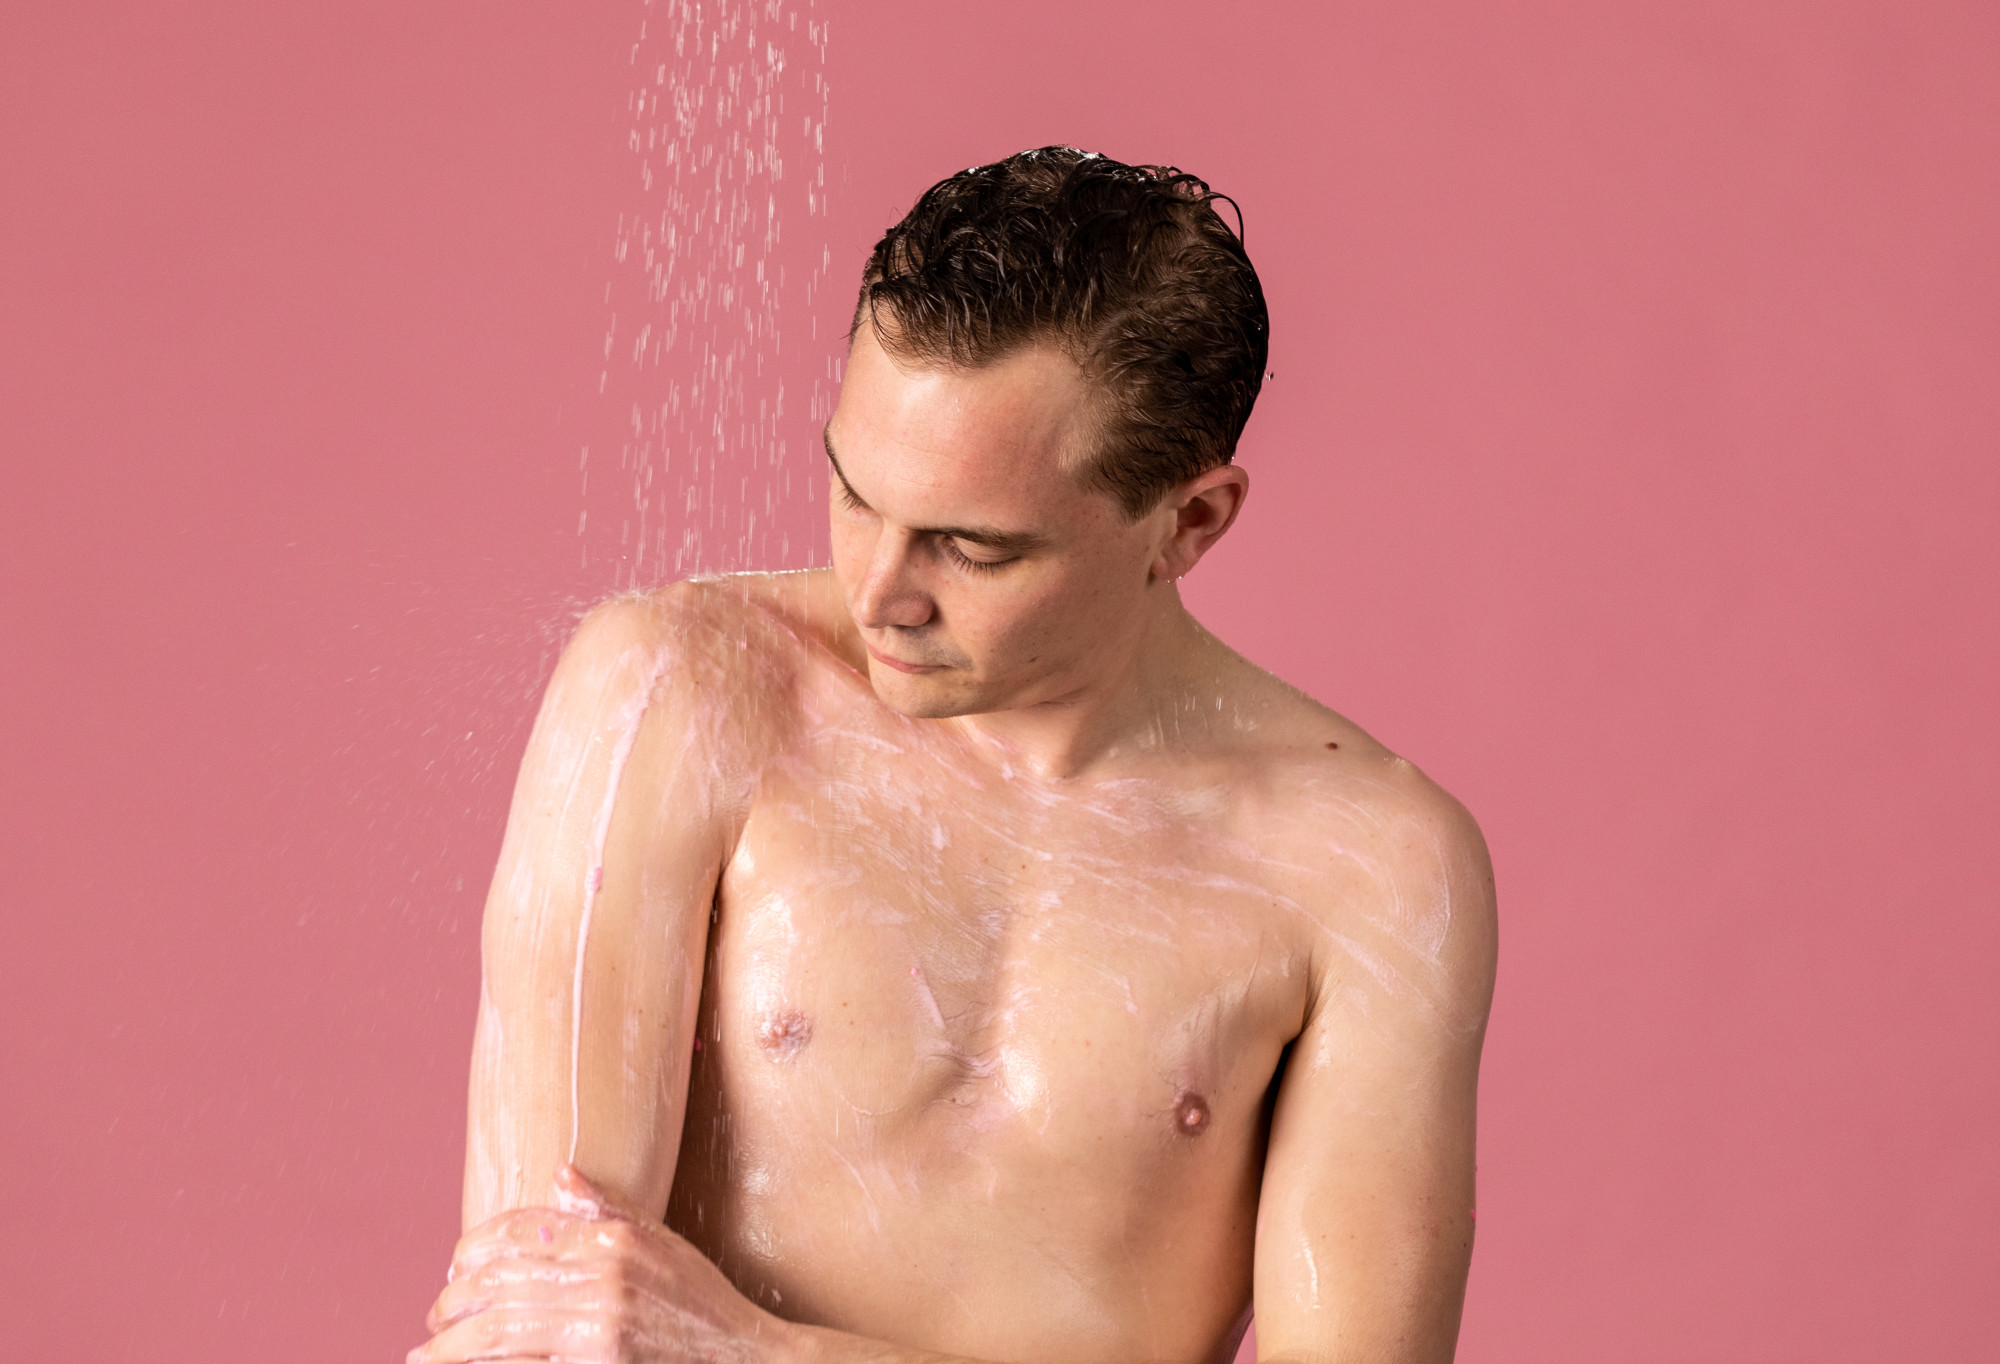 A person, whose upper body is covered in delicate, light pink foam, stands under a shower looking pensive as they rub their arm.